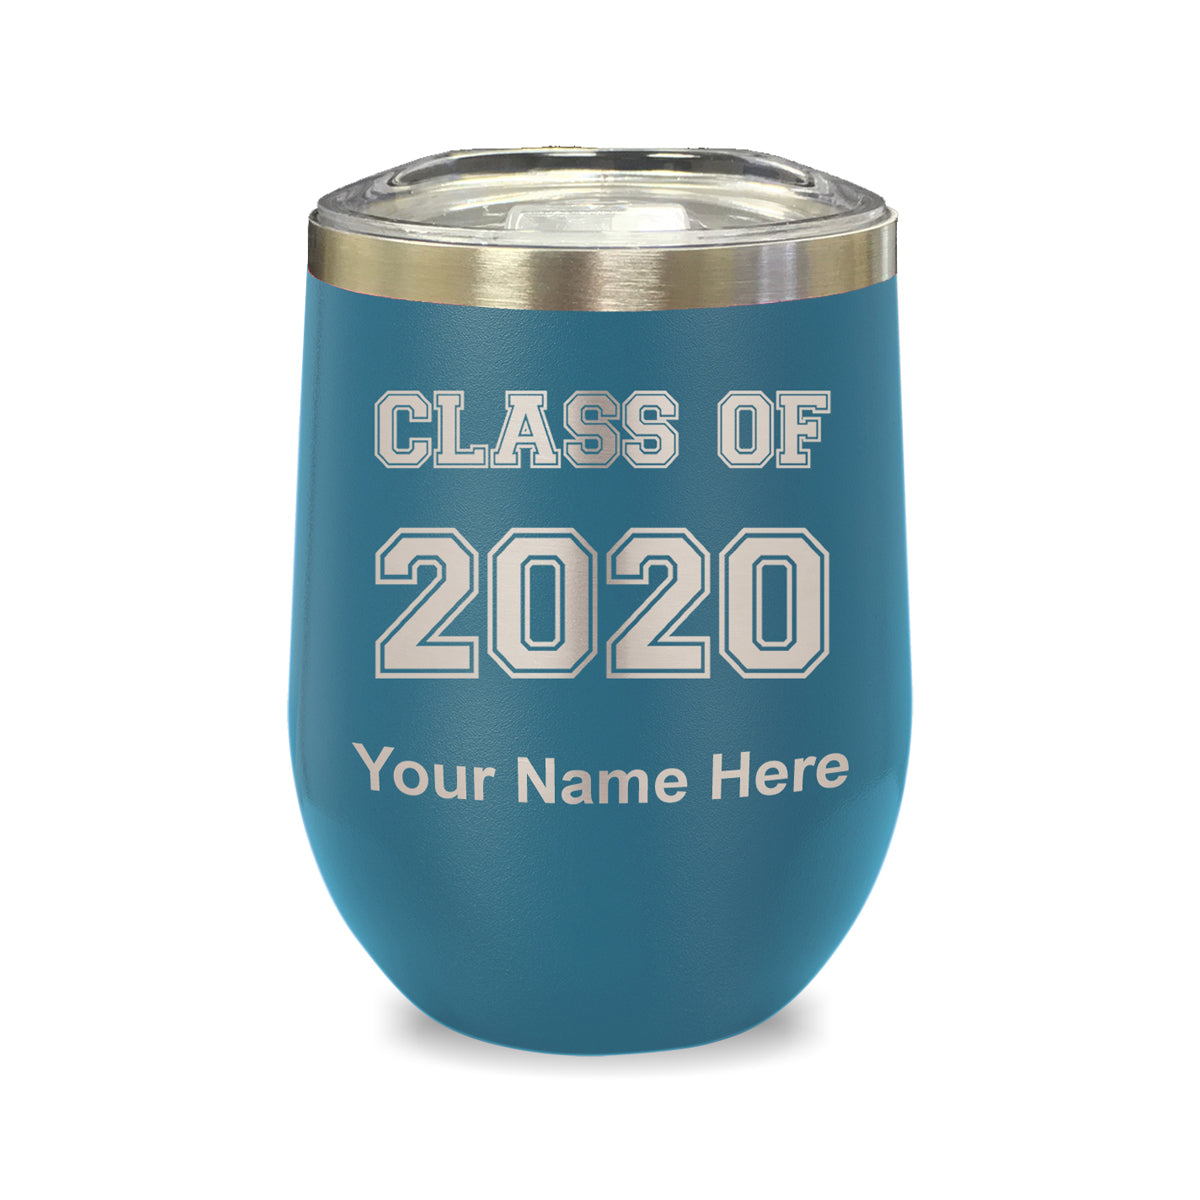 LaserGram Double Wall Stainless Steel Wine Glass, Class of 2020, 2021, 2022, 2023, 2024, 2025, Personalized Engraving Included